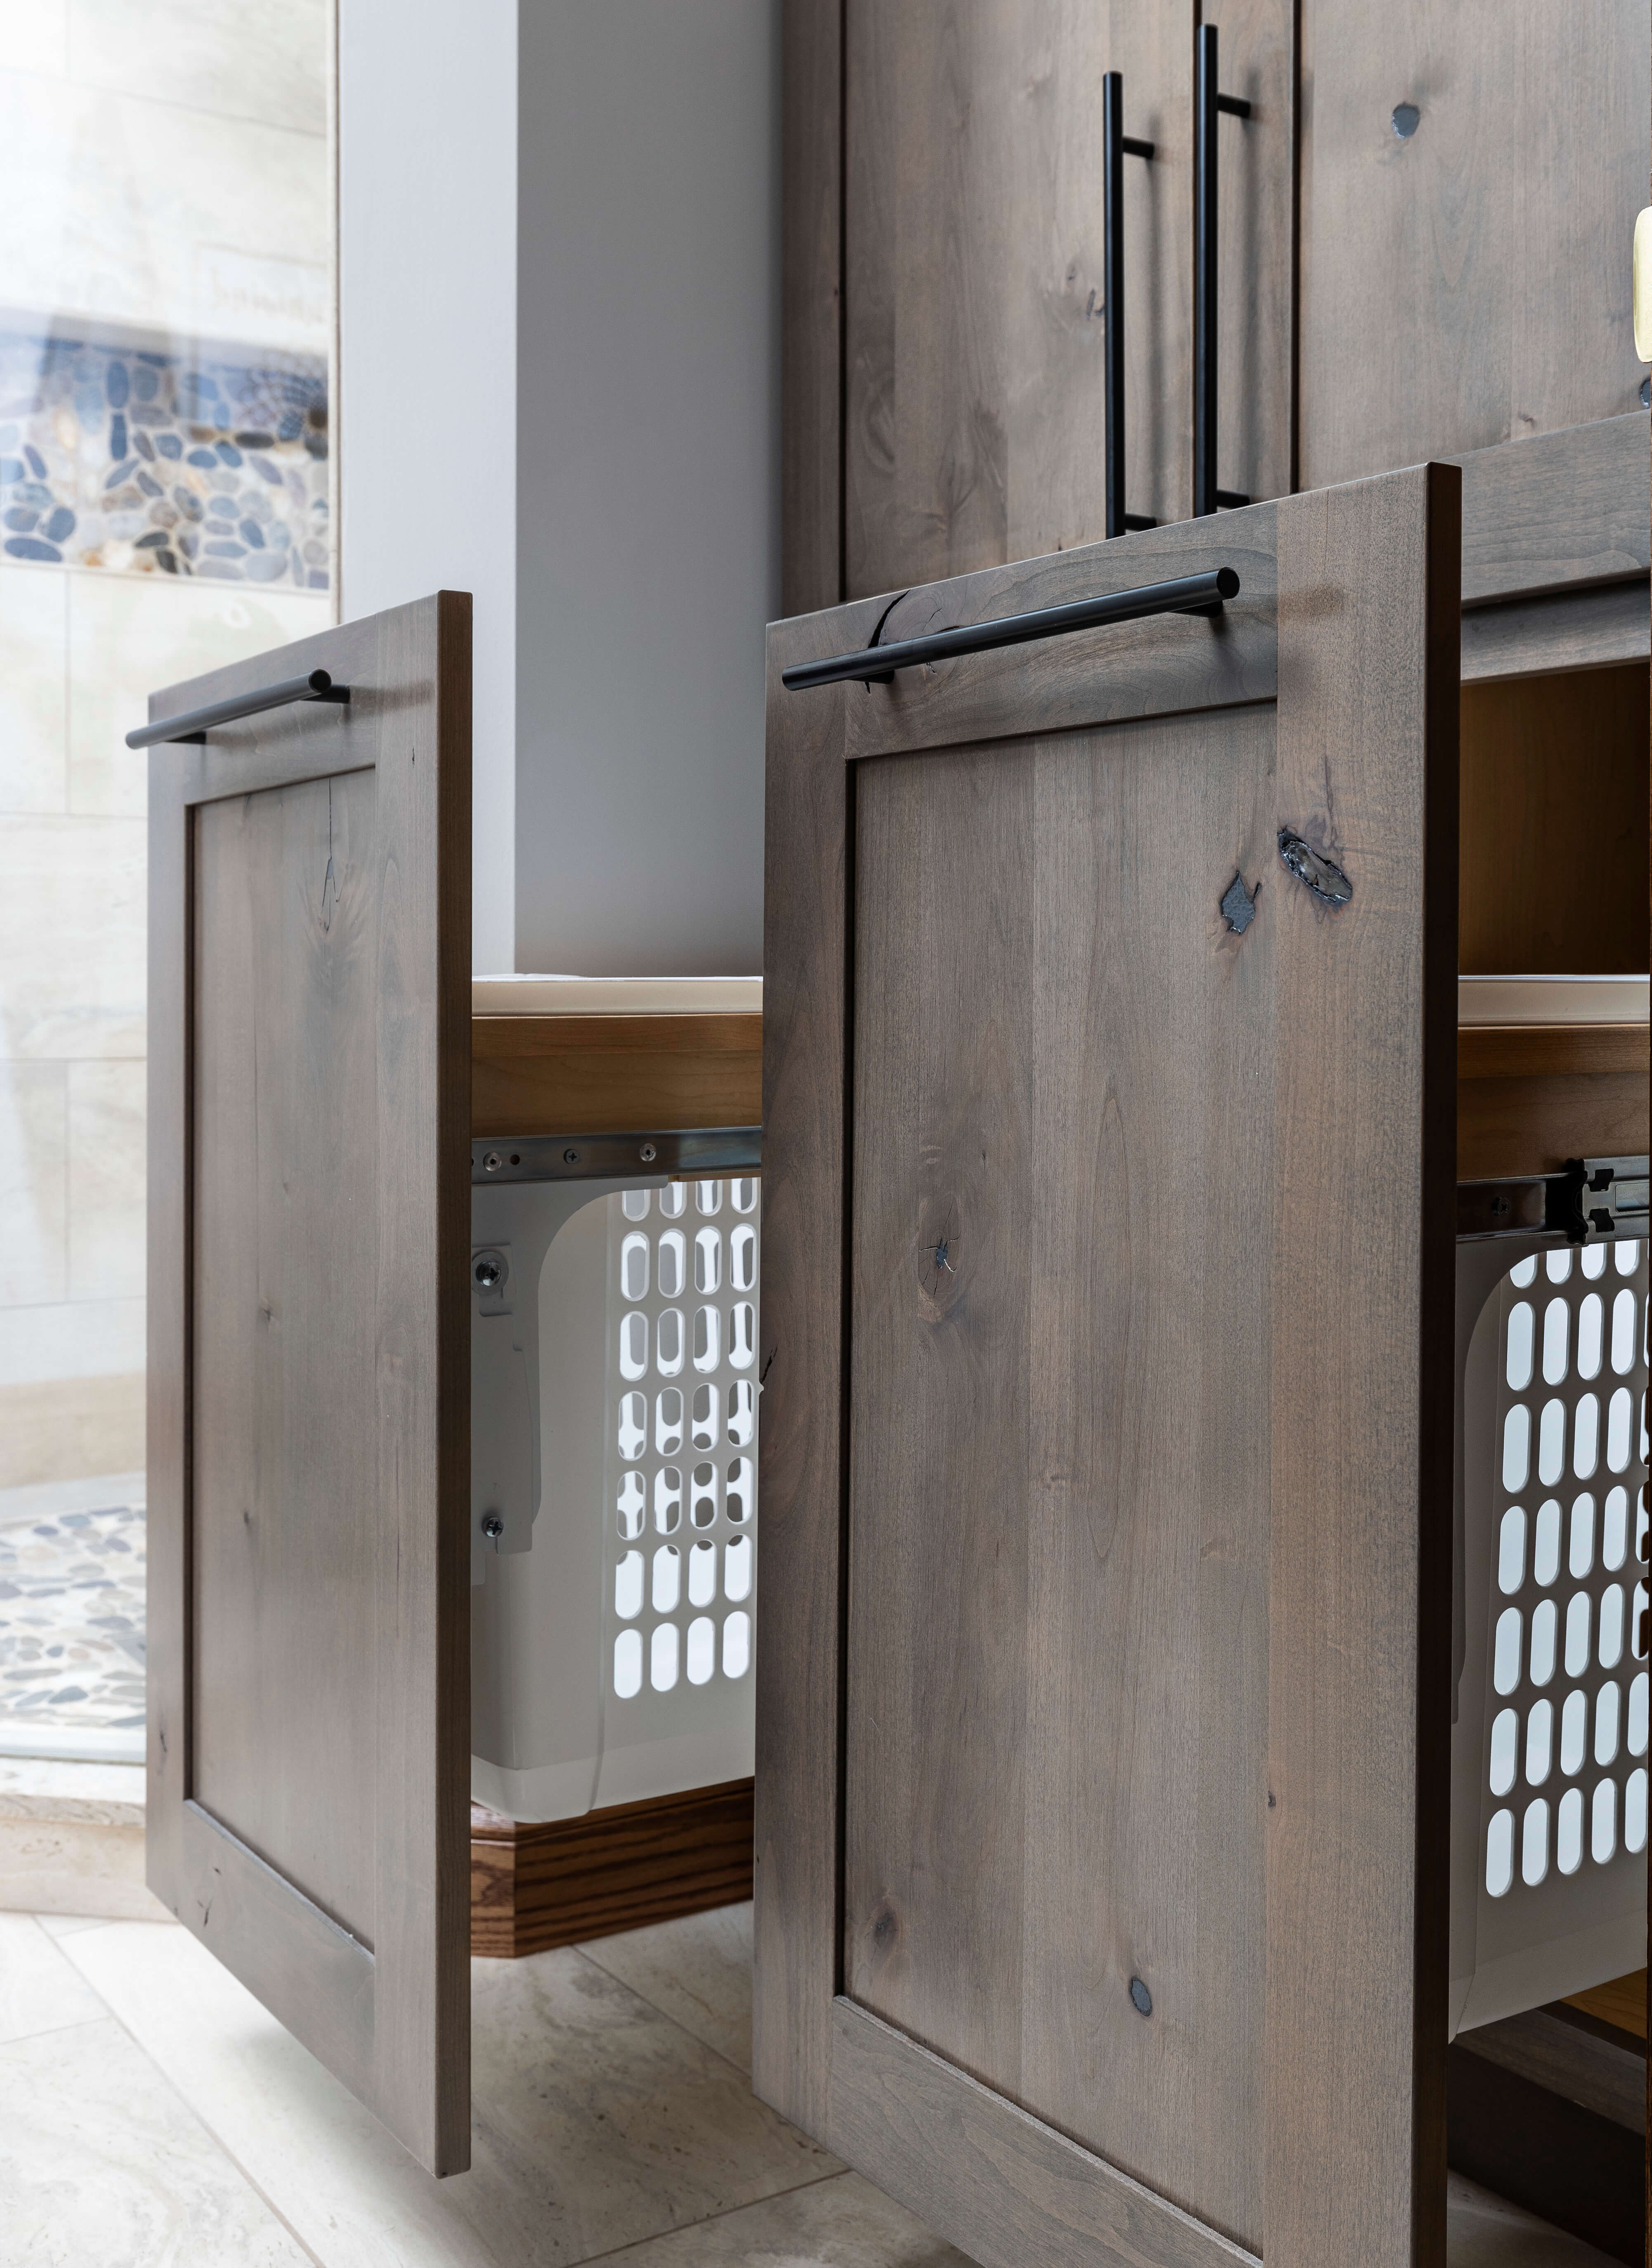 Two pull-out laundry hamper cabinets in a rustic knotty alder cabinet.